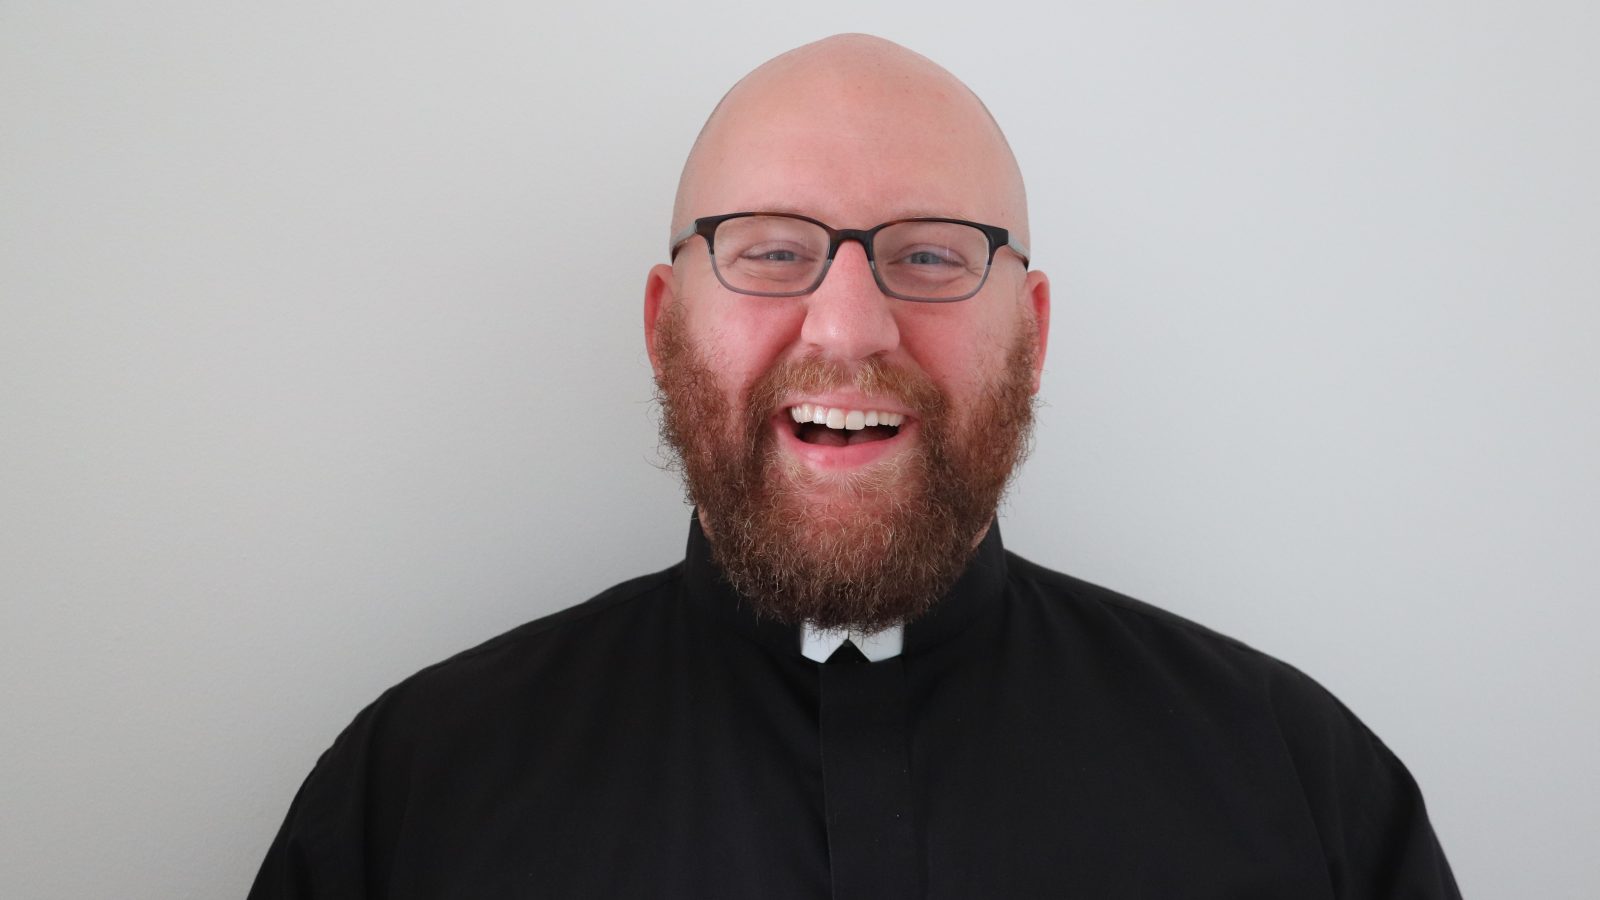 A headshot of Ken Homan (G&#039;25) who is wearing glasses and is dressed in black with a white collar. Ken is a Jesuit brother and part of the Society of Jesus.